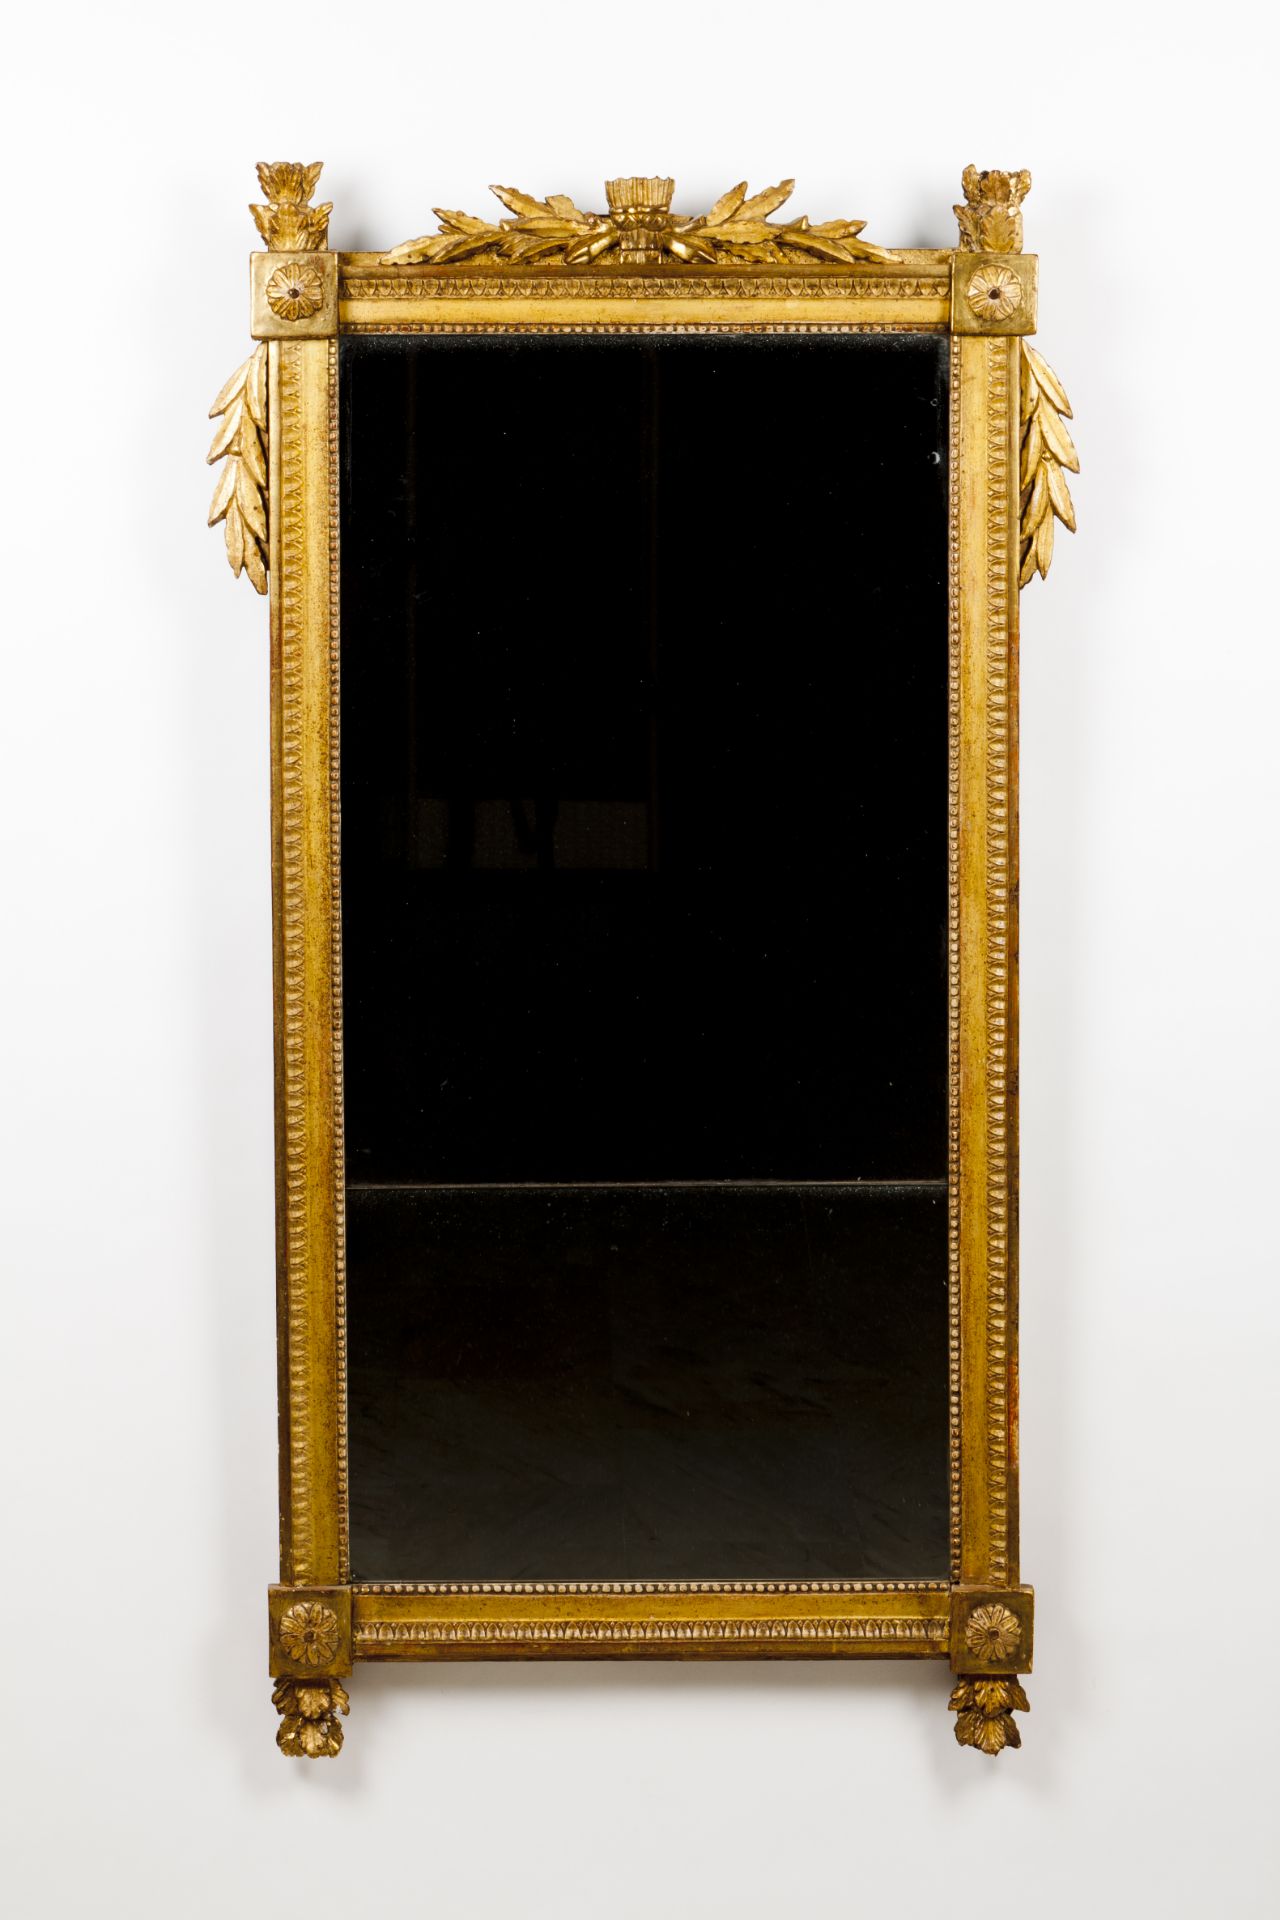 A louis XVI wall mirrorCarved and gilt wooden frame Beading, rosettes and foliage decoration